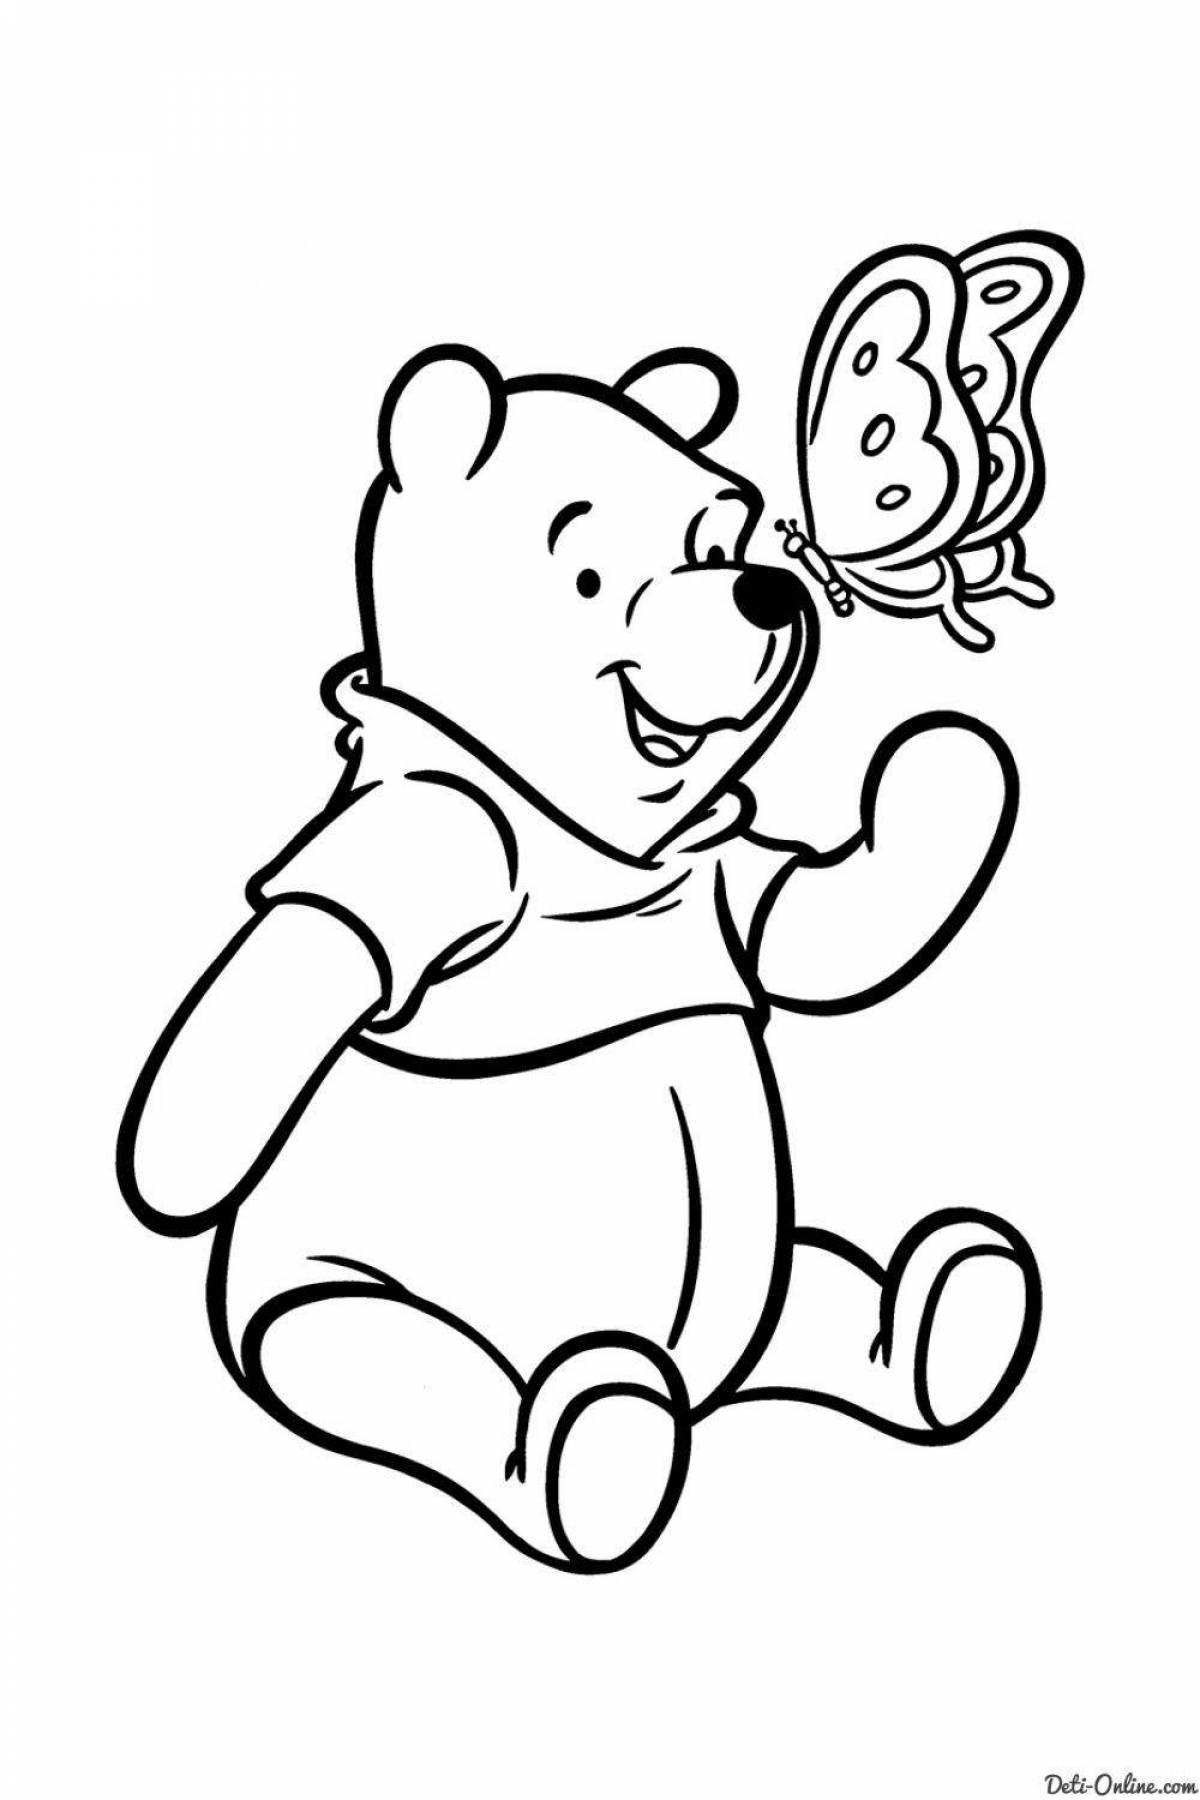 Animated olympic bear coloring page for kids